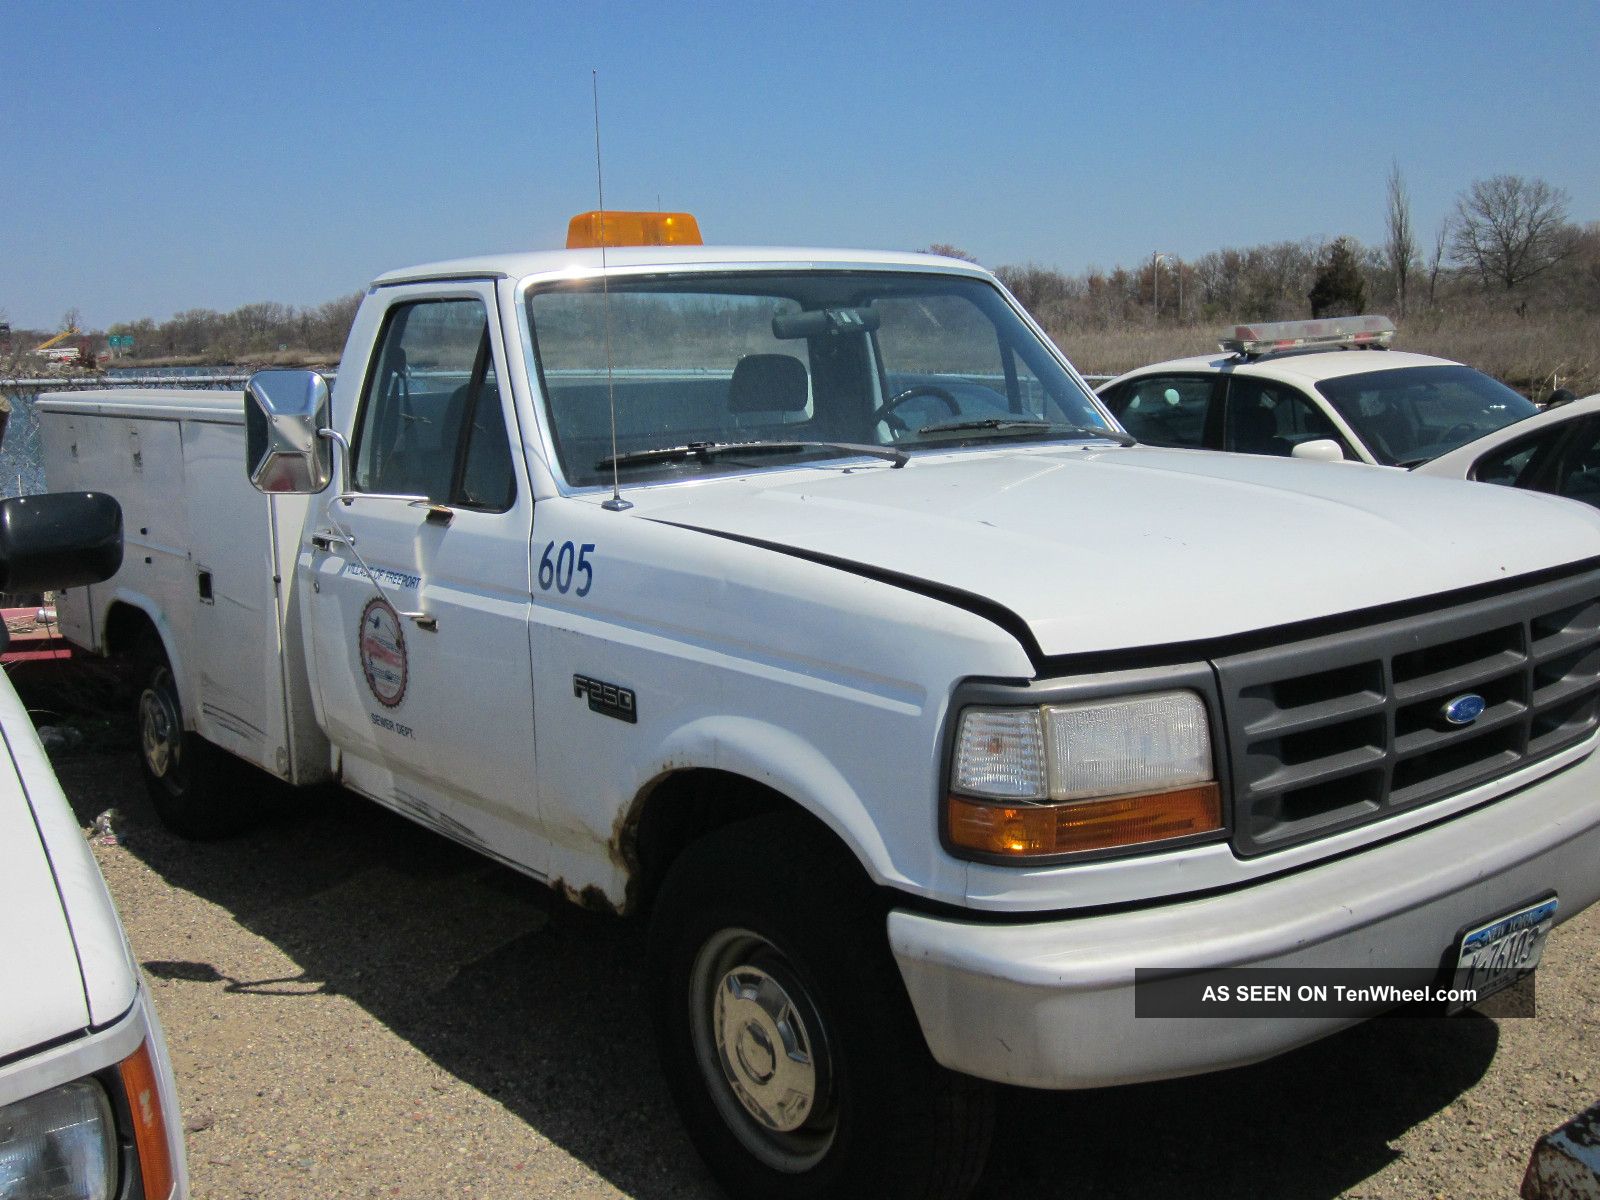 1993 Ford F250 Pick Up Truck 605